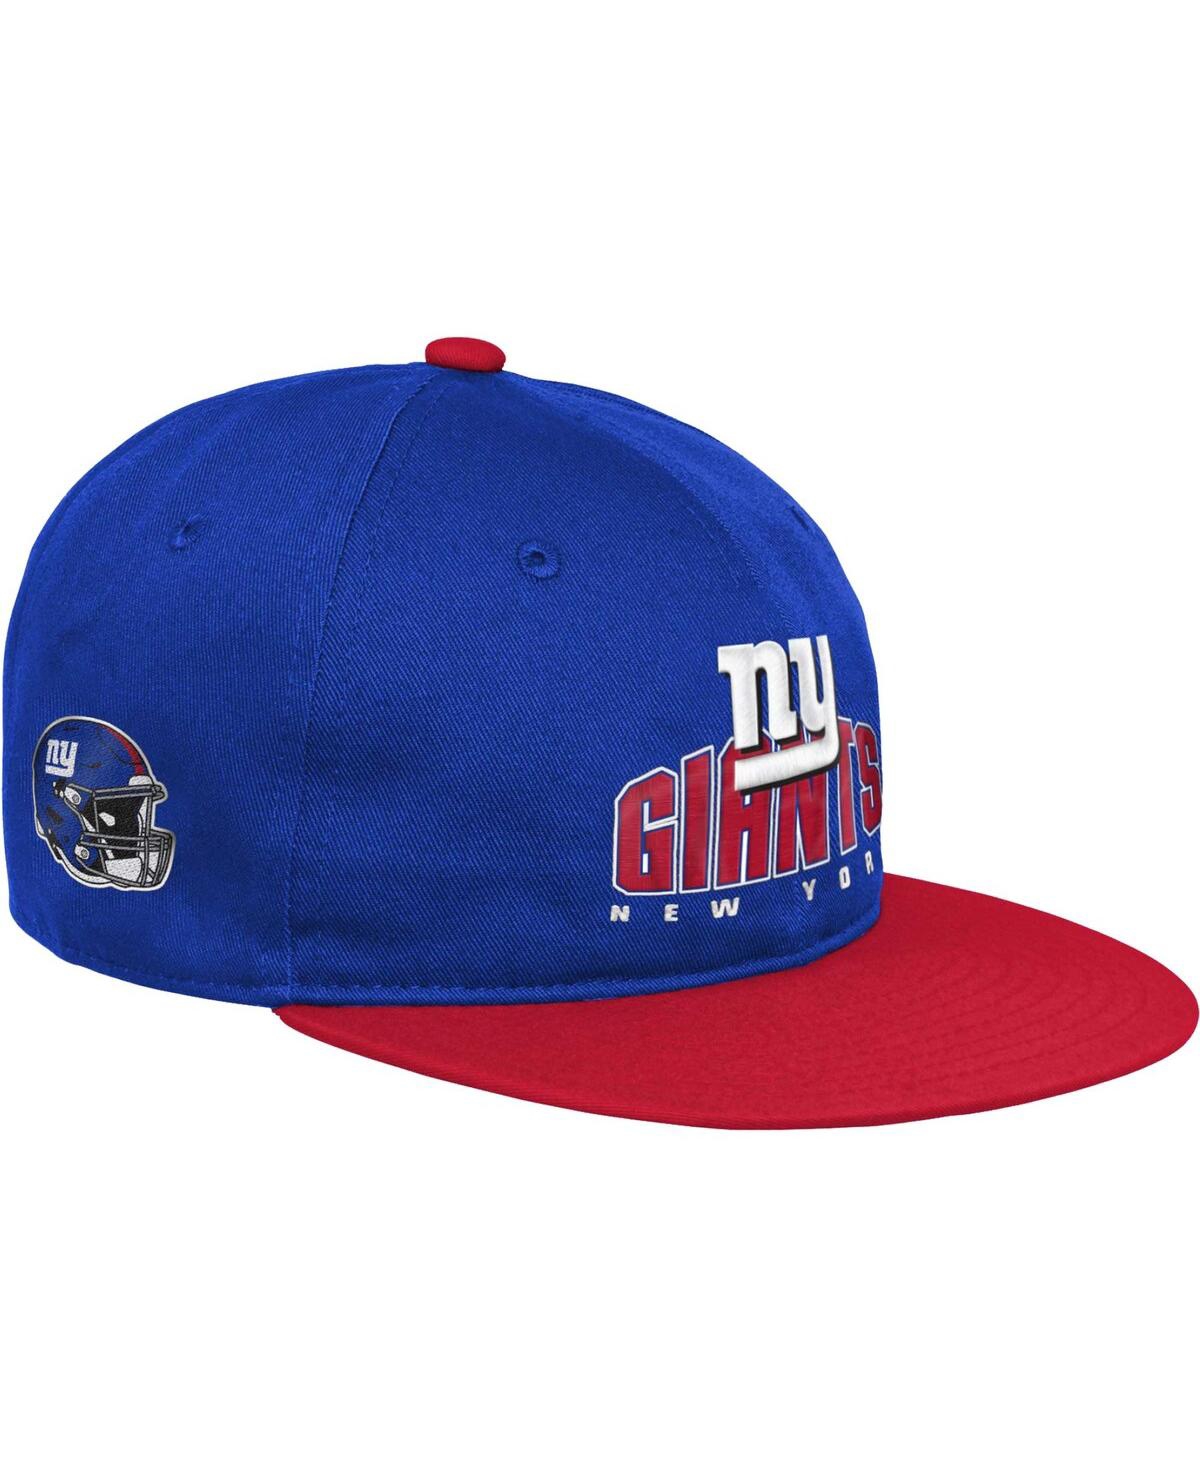 Shop Outerstuff Big Boys And Girls Royal New York Giants Legacy Deadstock Snapback Hat